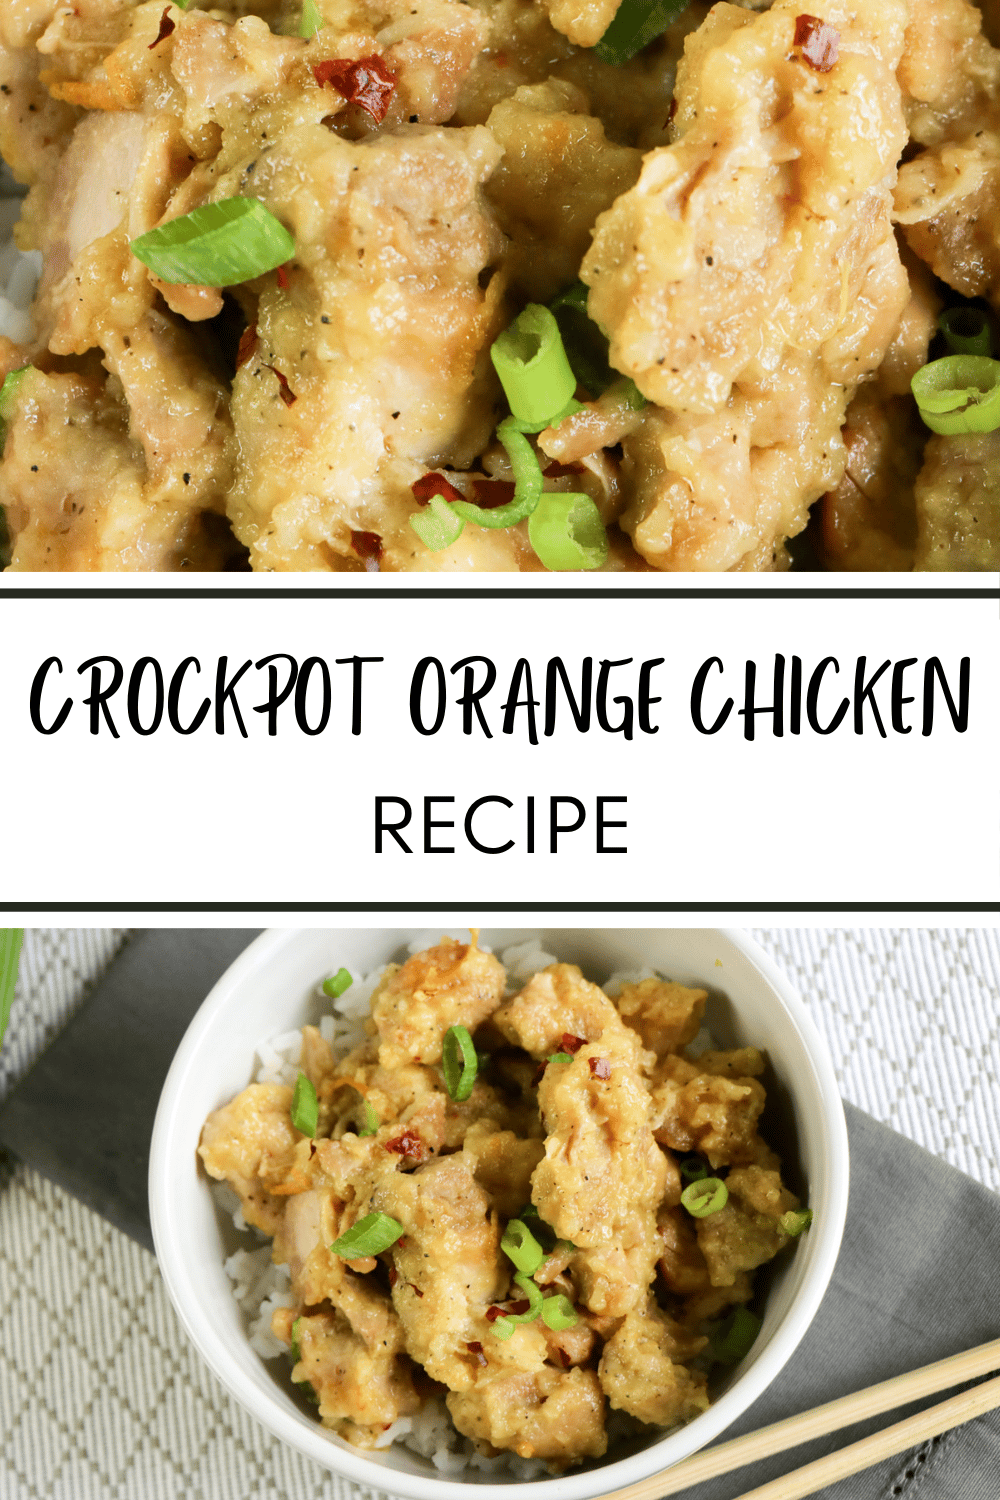 This Crockpot Orange Chicken Recipe is an easy and delicious way to get dinner on the table with very little effort. It's irresistible! #crockpotorangechicken #crockpot #slowcooker #orangechicken #recipe via @wondermomwannab